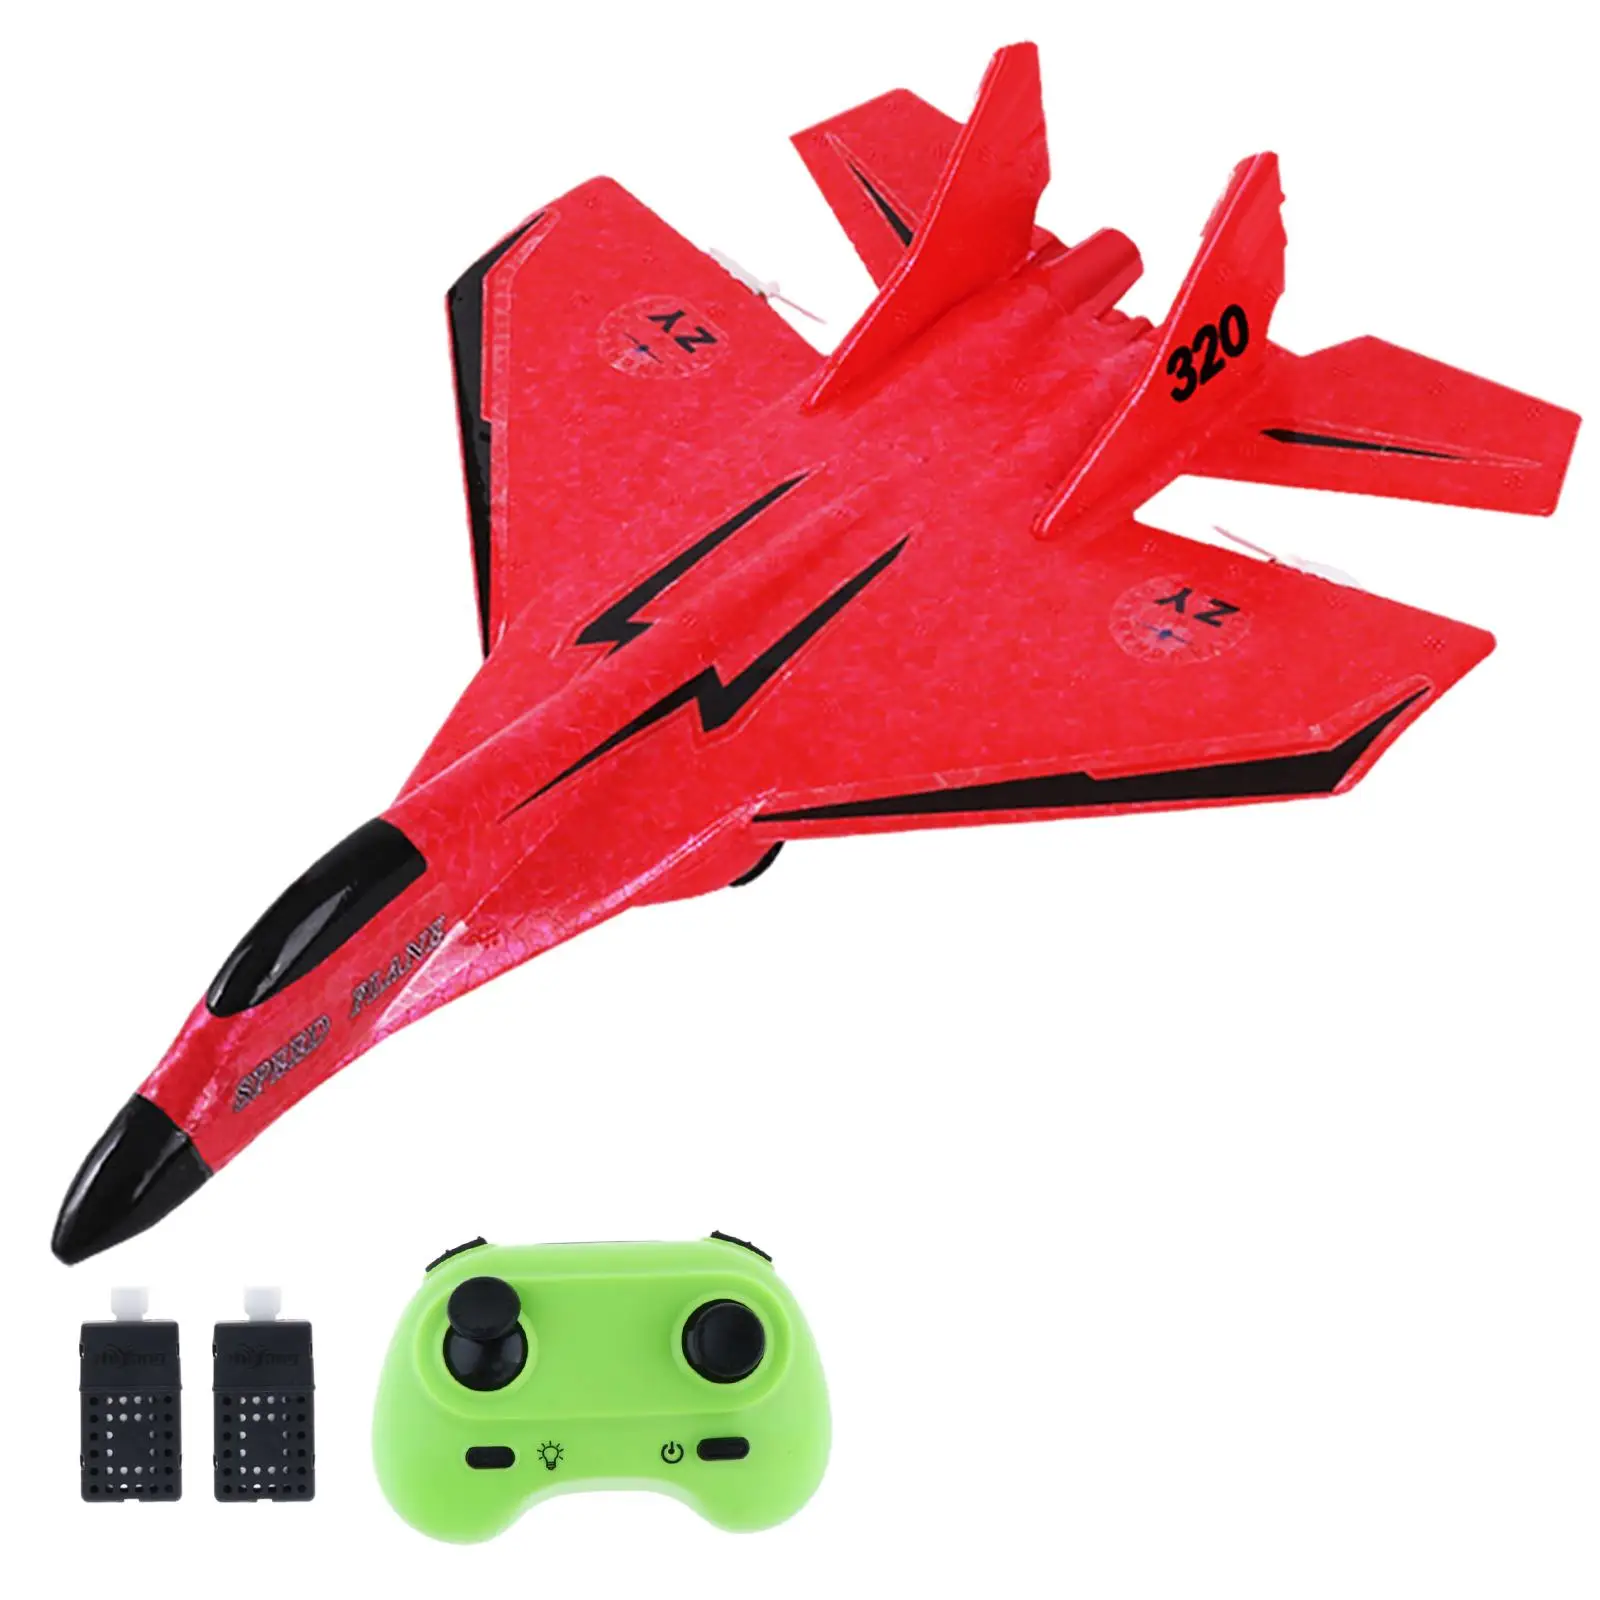 2 CH RC Plane Portable Ready to Easy to Control with Light Gift Foam RC Airplane RC Glider Aircraft for Kids Boys Girls